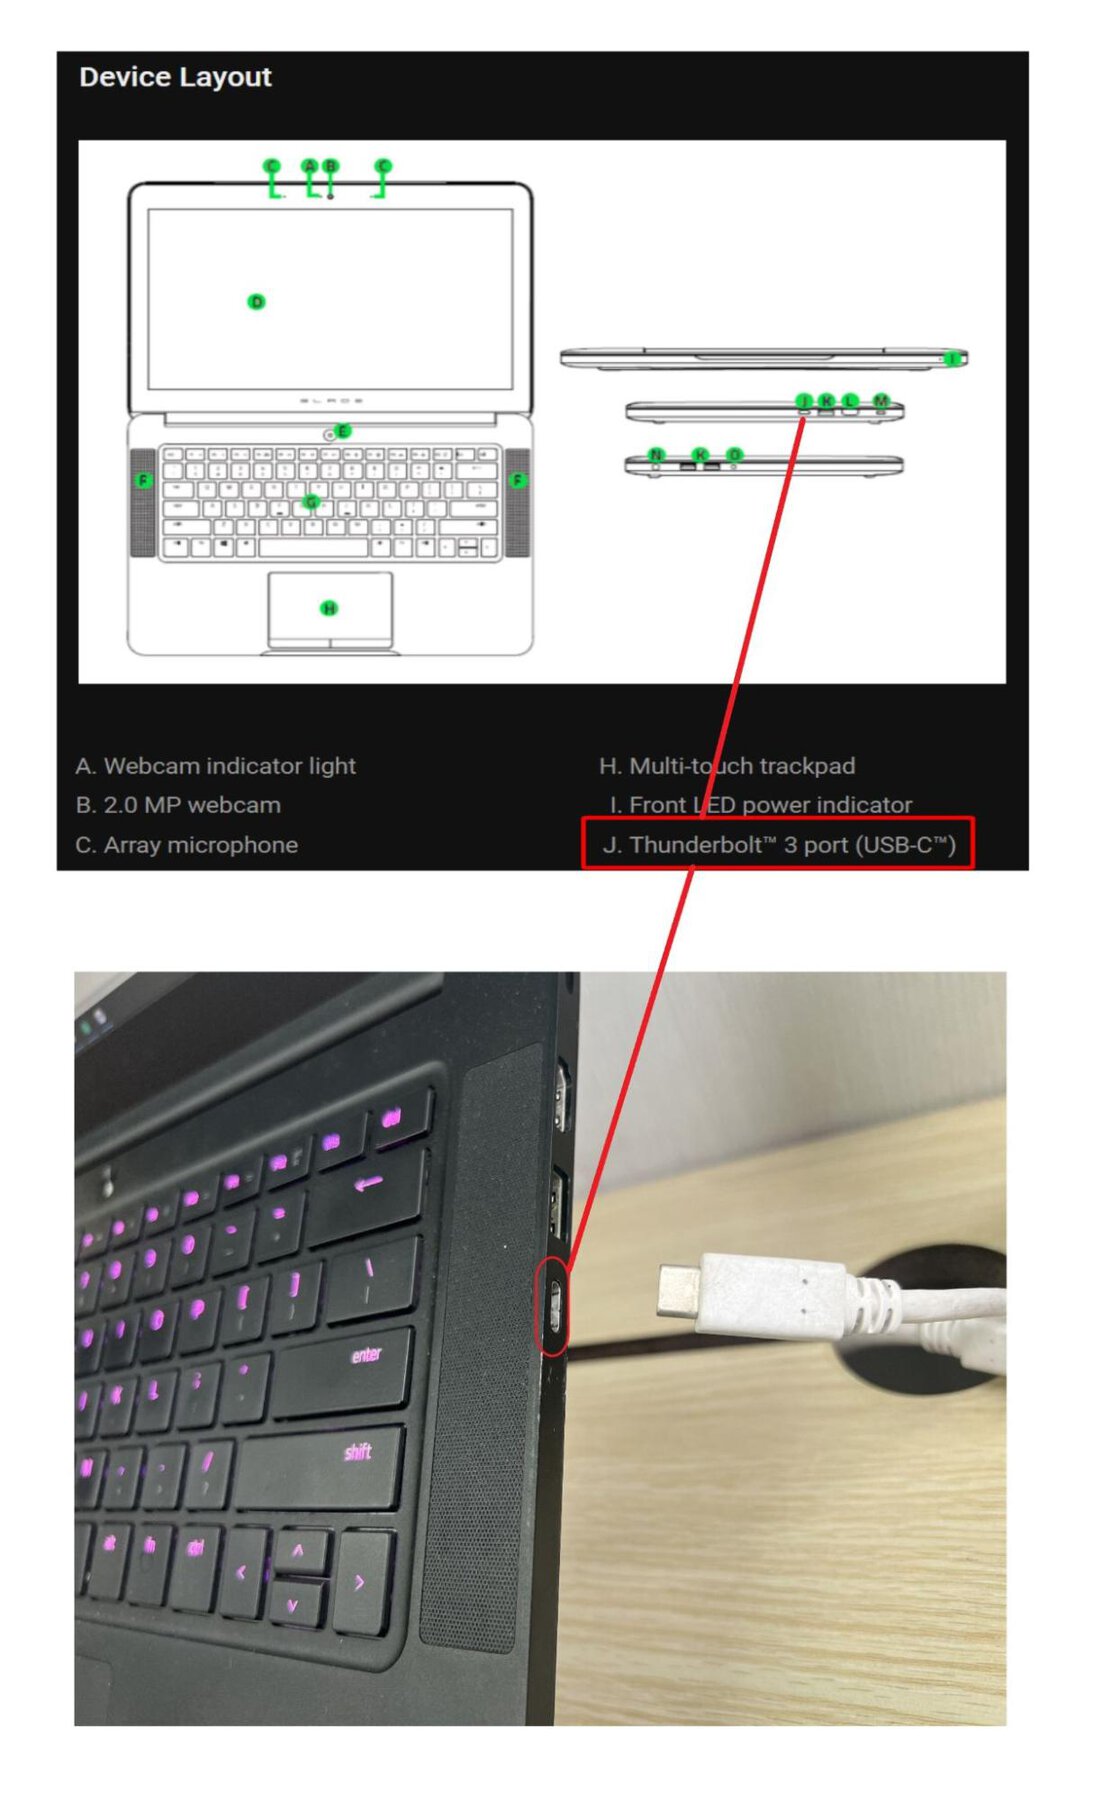 The DisplayPort from the Razer computer is highlighted with a red box and a diagram is showing where the DP is located